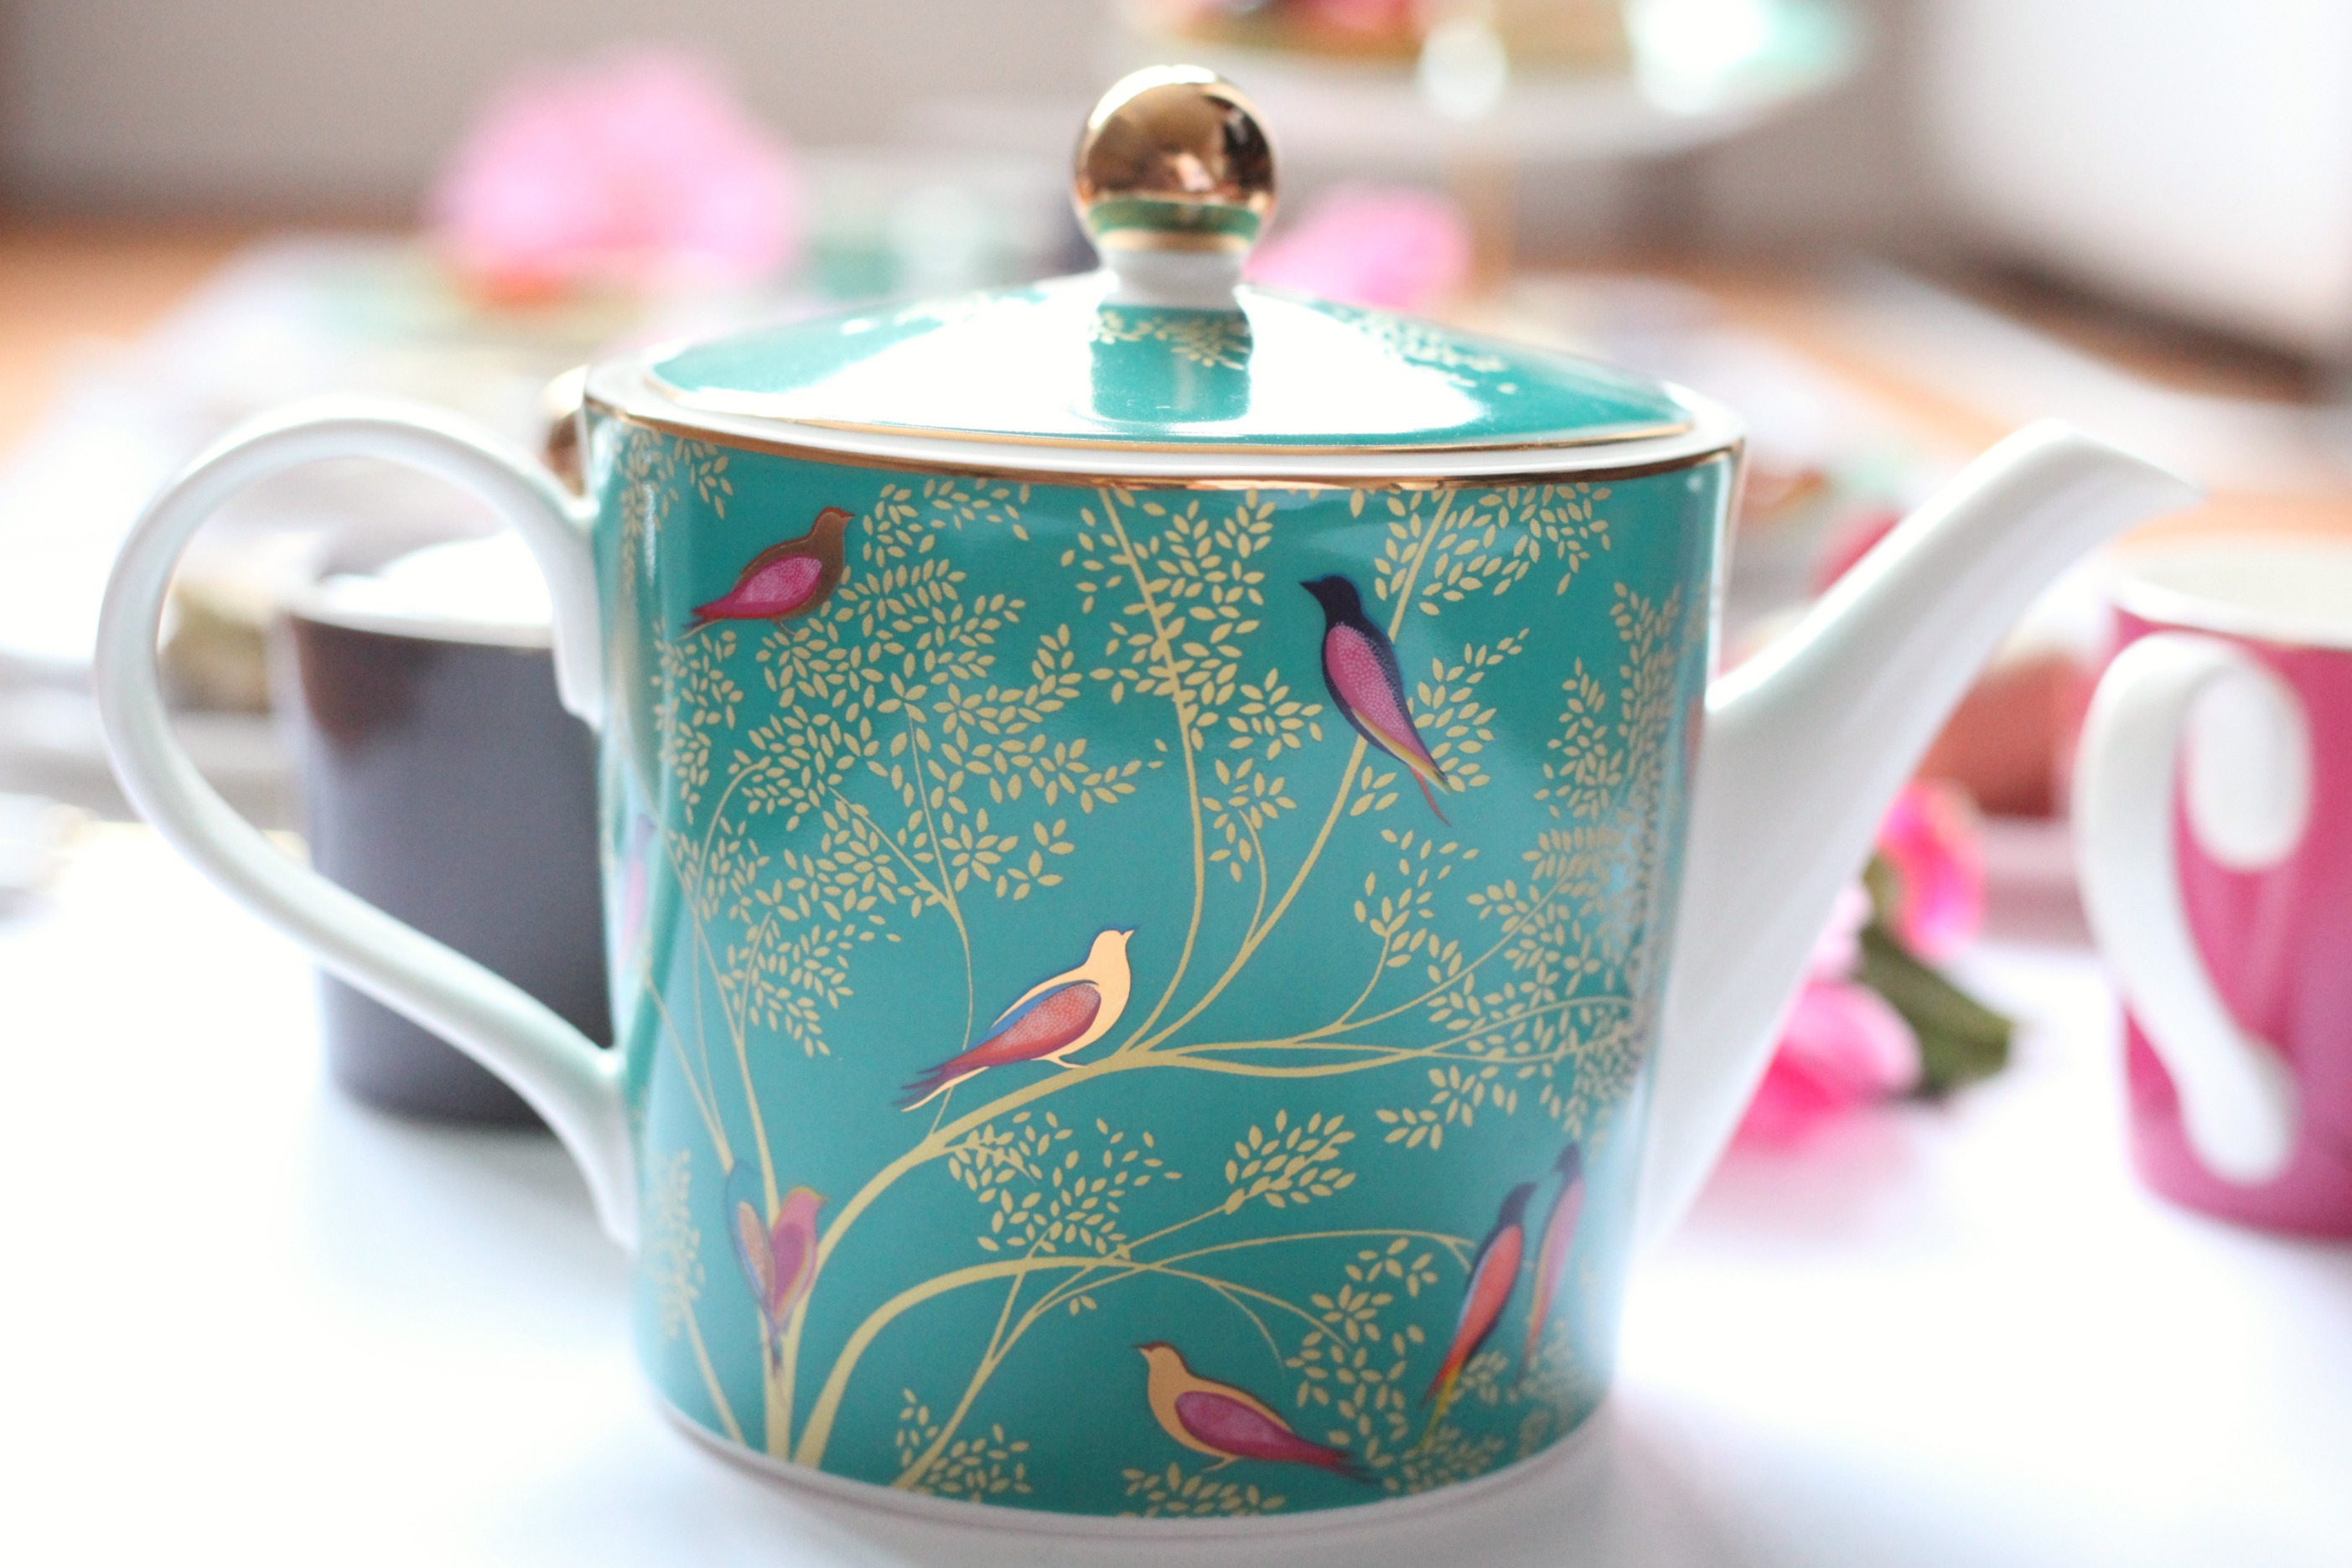 Teapot from Sara Miller London Portmeirion Chelsea Collection